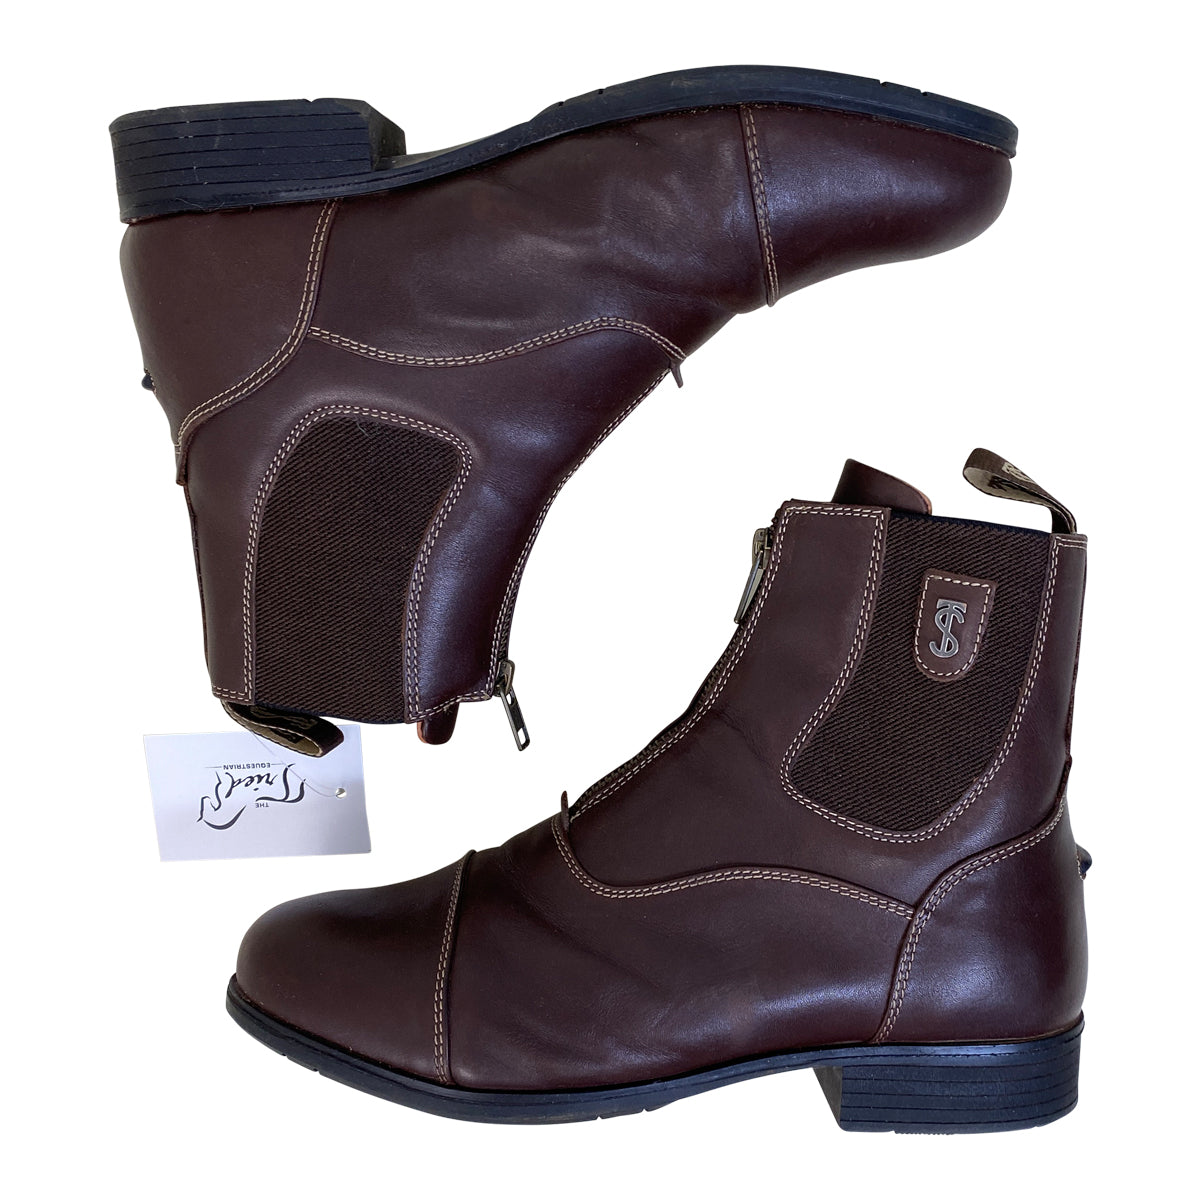 Tredstep 'Donatello' Front-Zip Paddock Boots in Brown